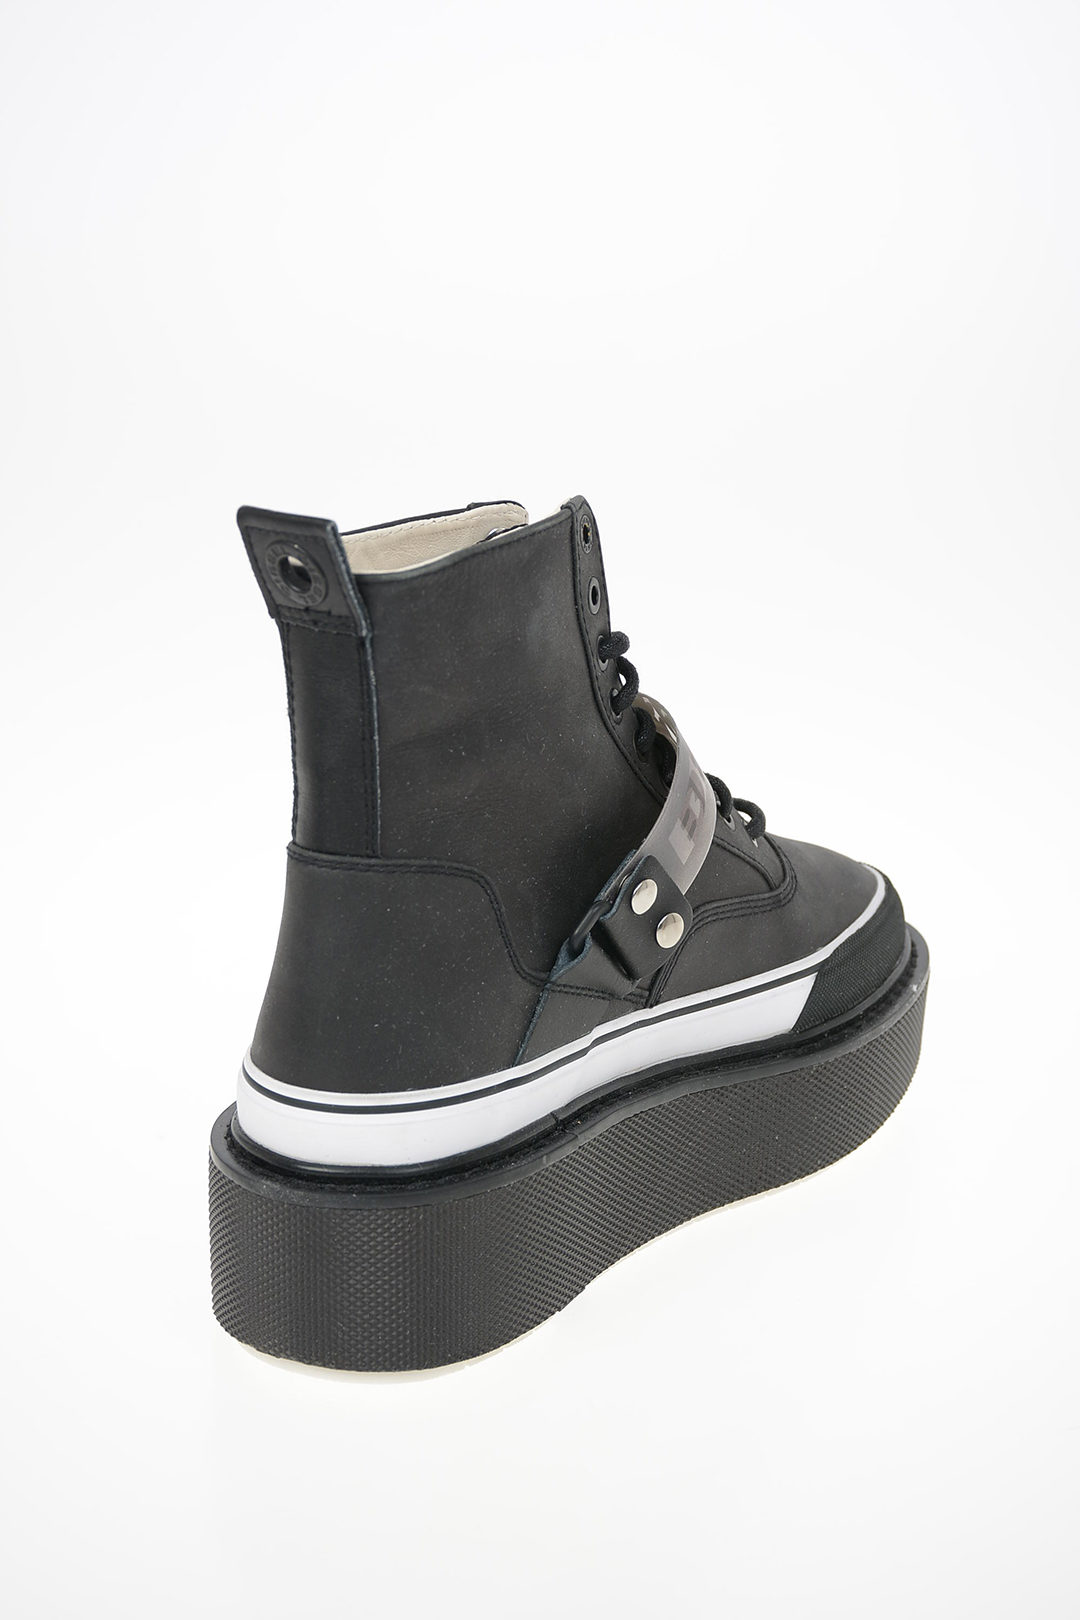 Diesel Leather Sneakers SCIROCCO with Platform women - Glamood Outlet